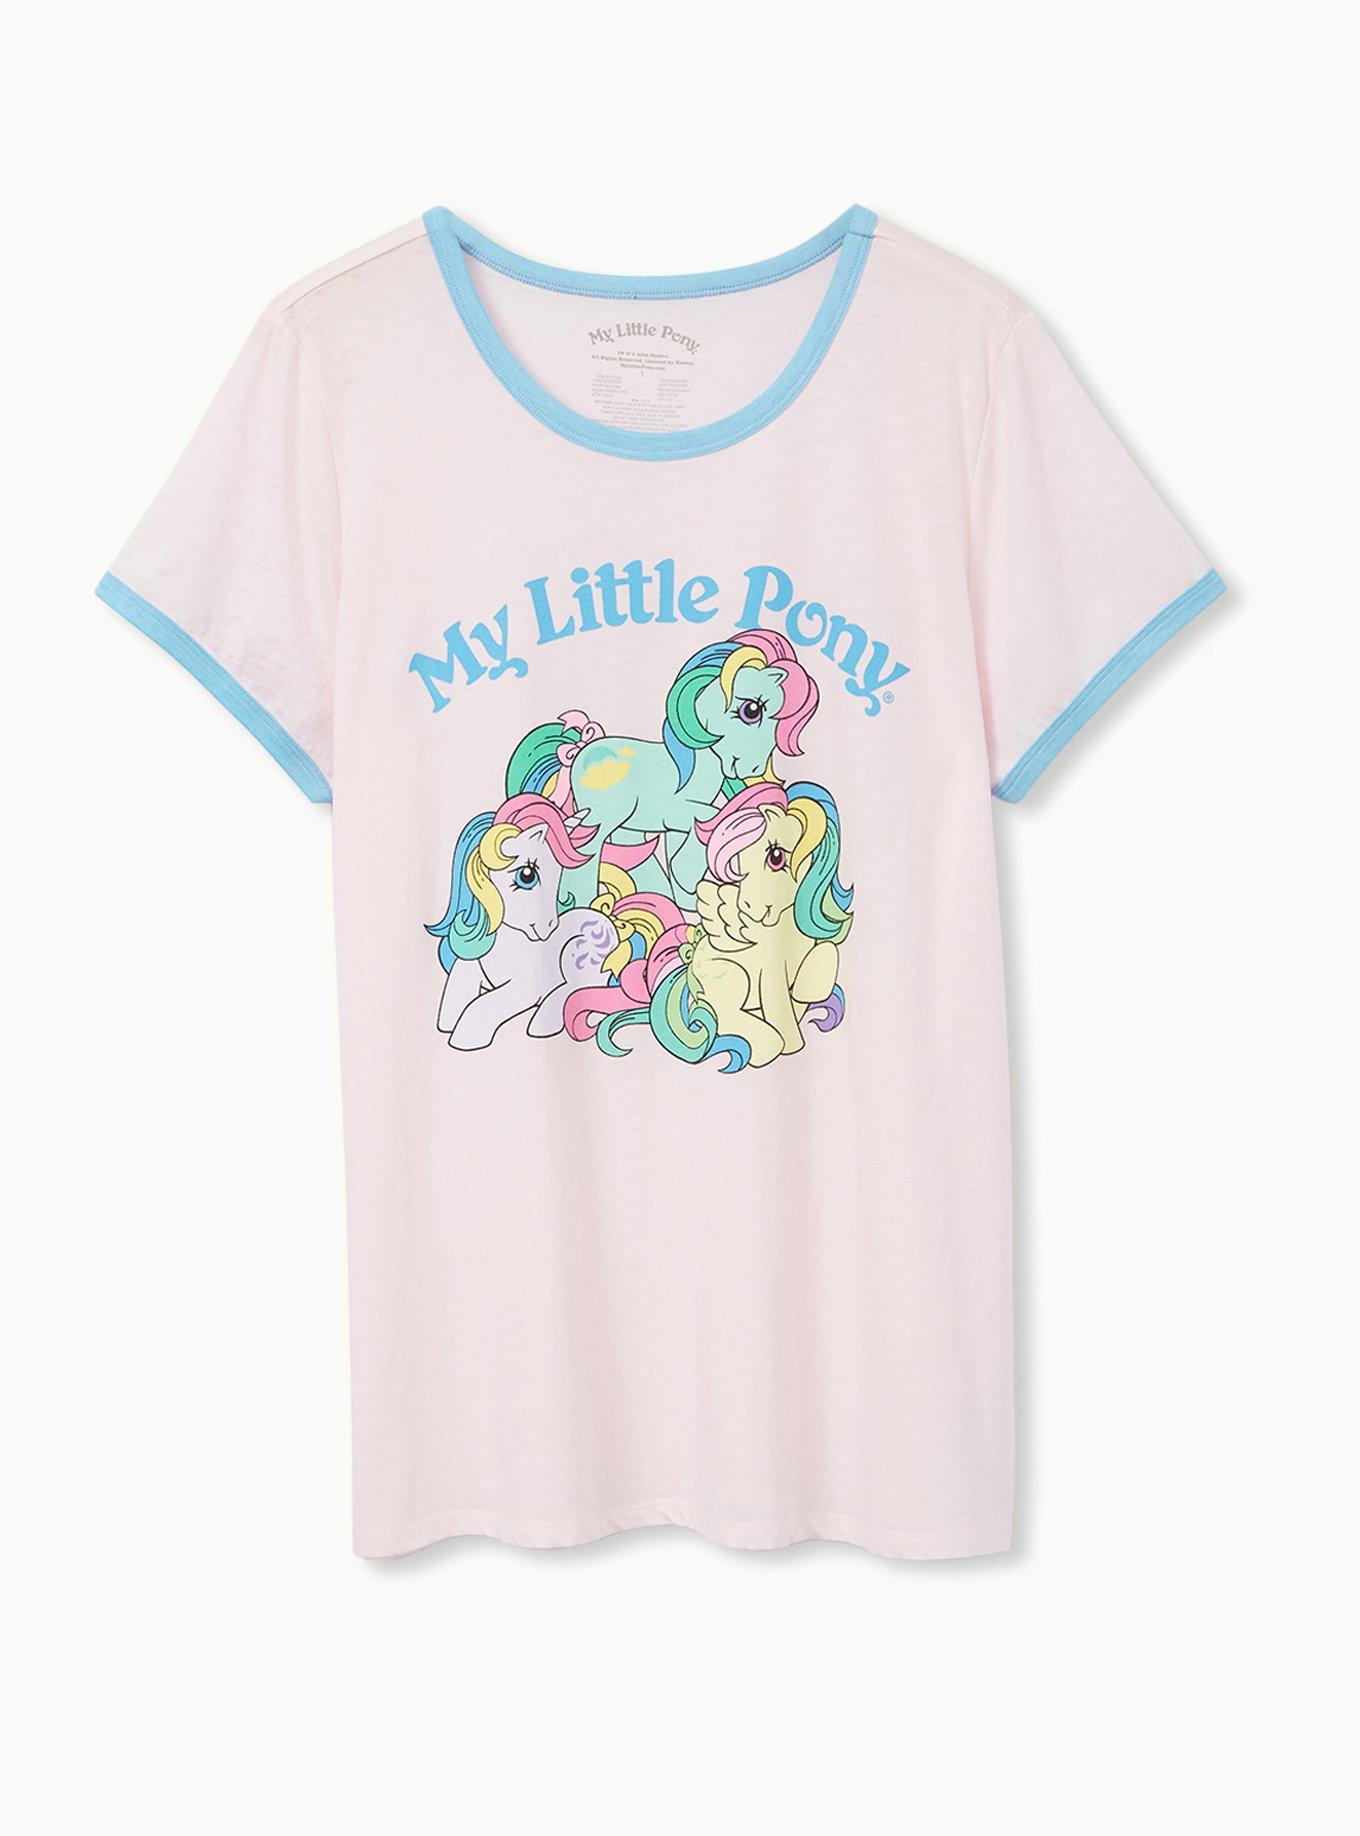 Plus Size - My Little Pony Classic Fit Ringer Tee - Pink - Torrid